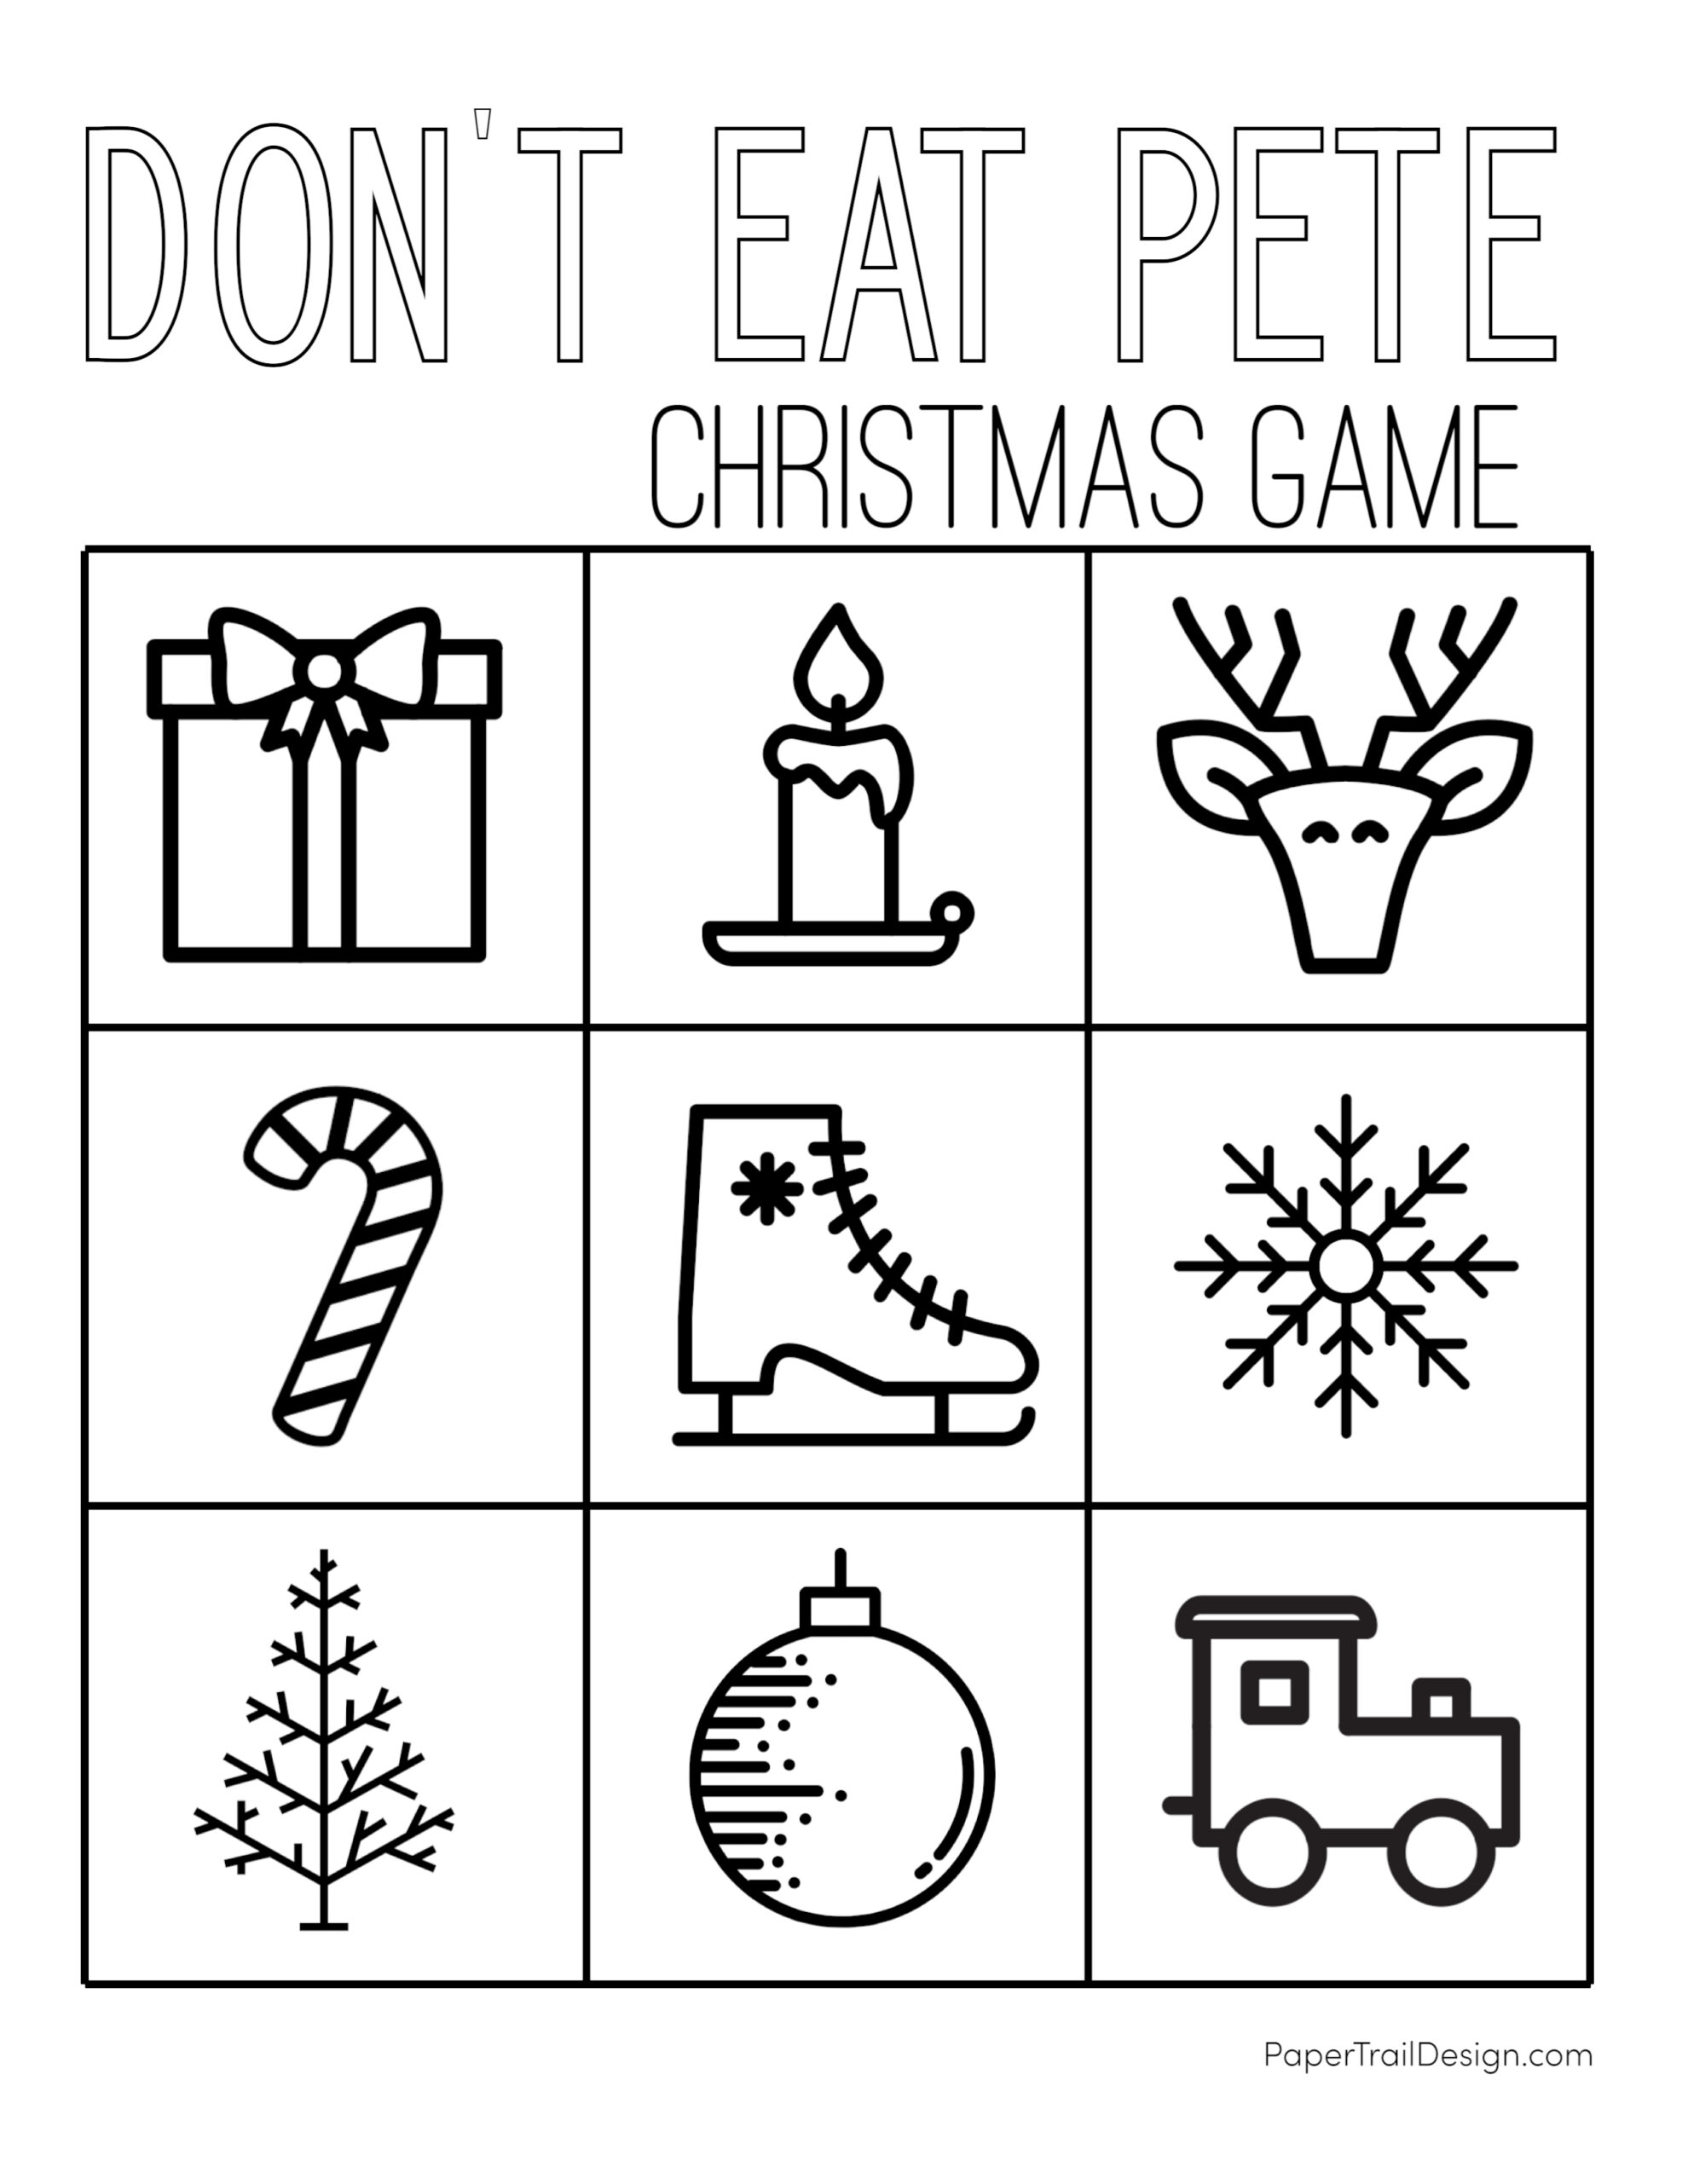 don-t-eat-pete-game-christmas-edition-paper-trail-design